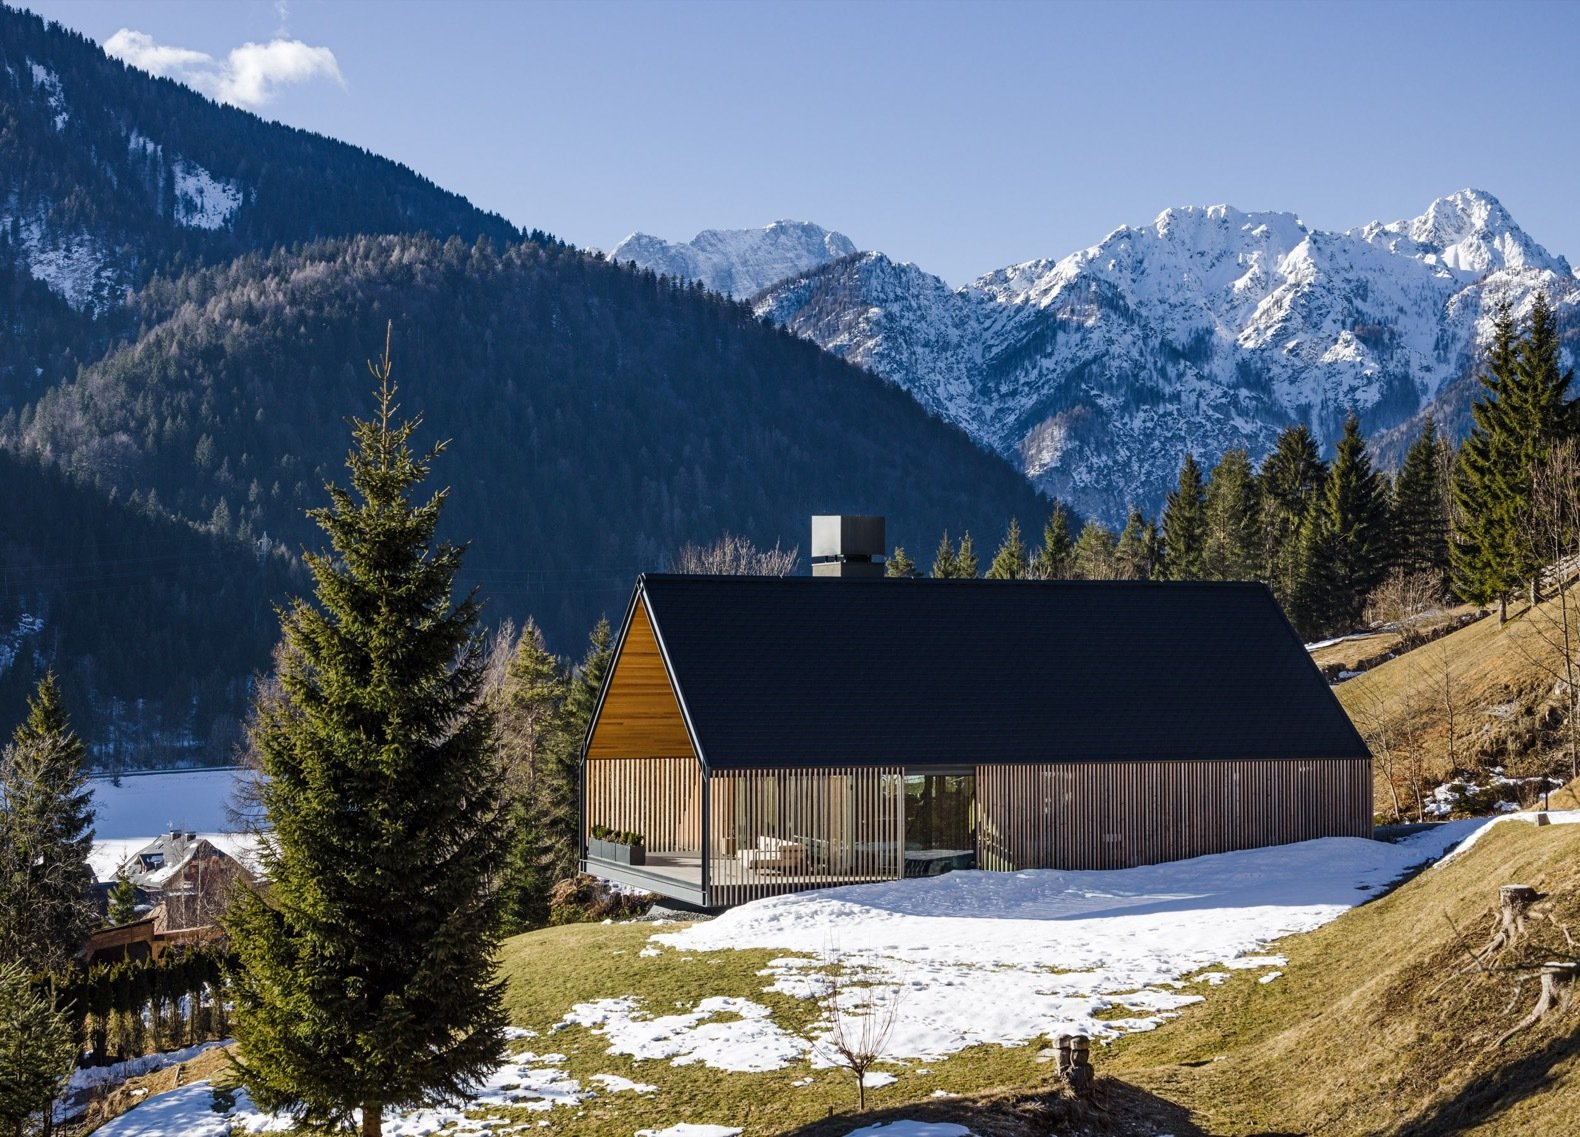 The contemporary home's gabled roofline and timber materials are a nod to the traditional alpine vernacular.